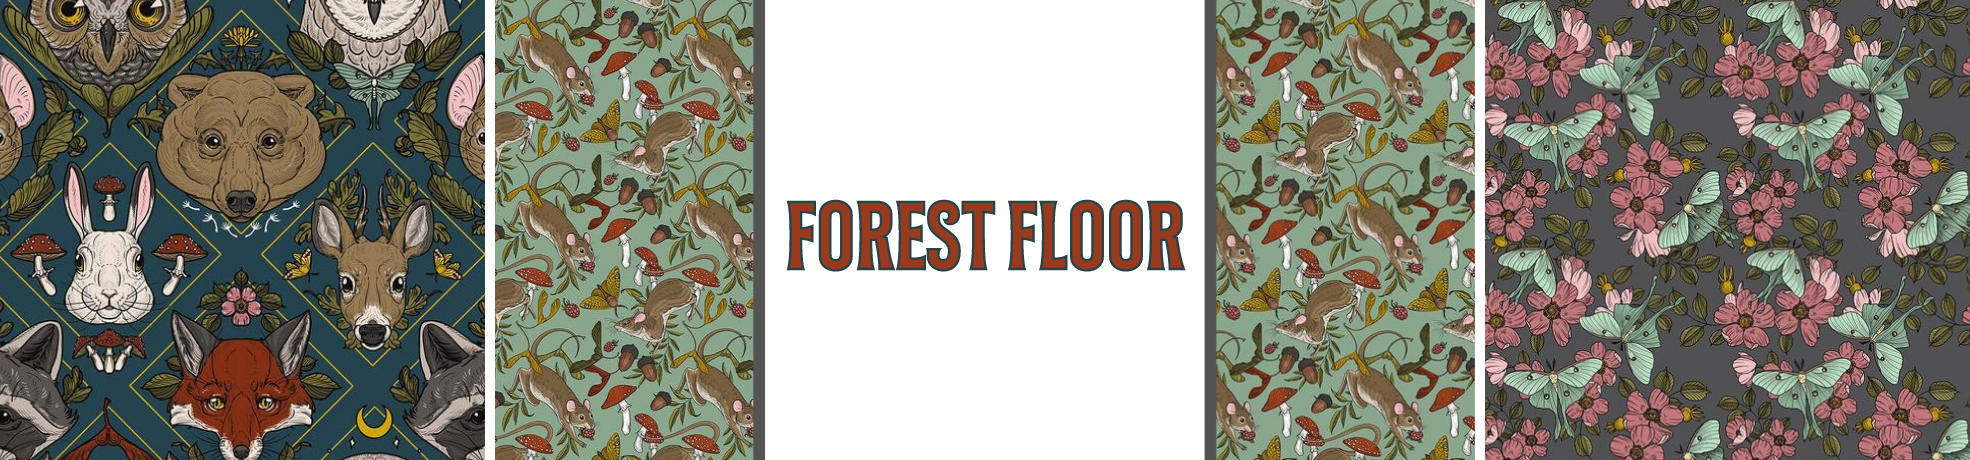 Forest Floor Fabric Collection